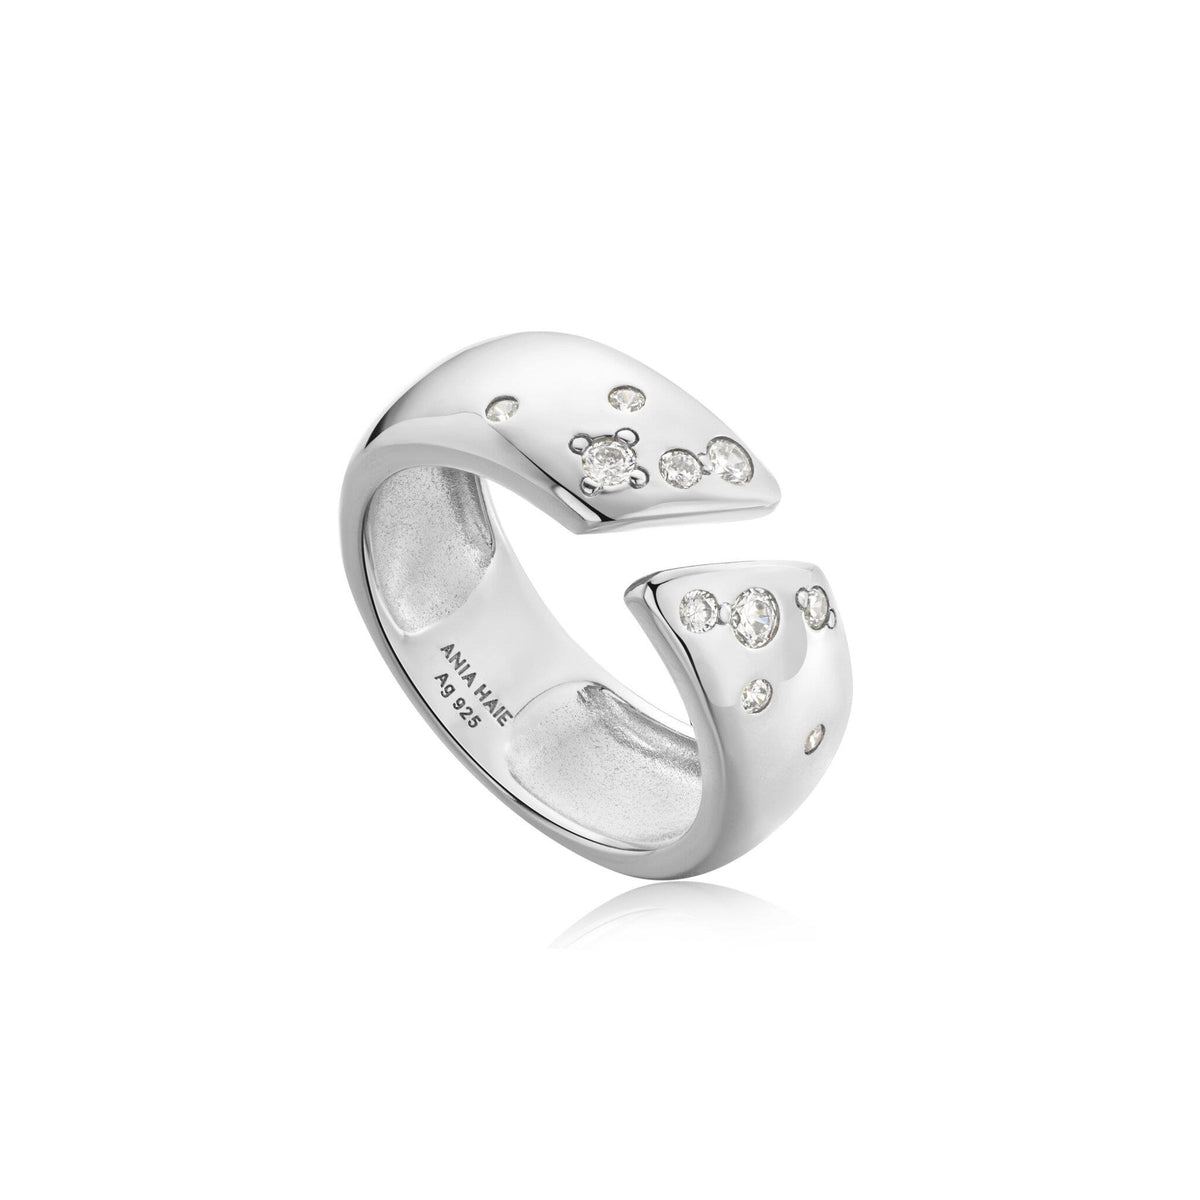 Ania Haie Sparkle Wide Adjustable Ring in Sterling Silver